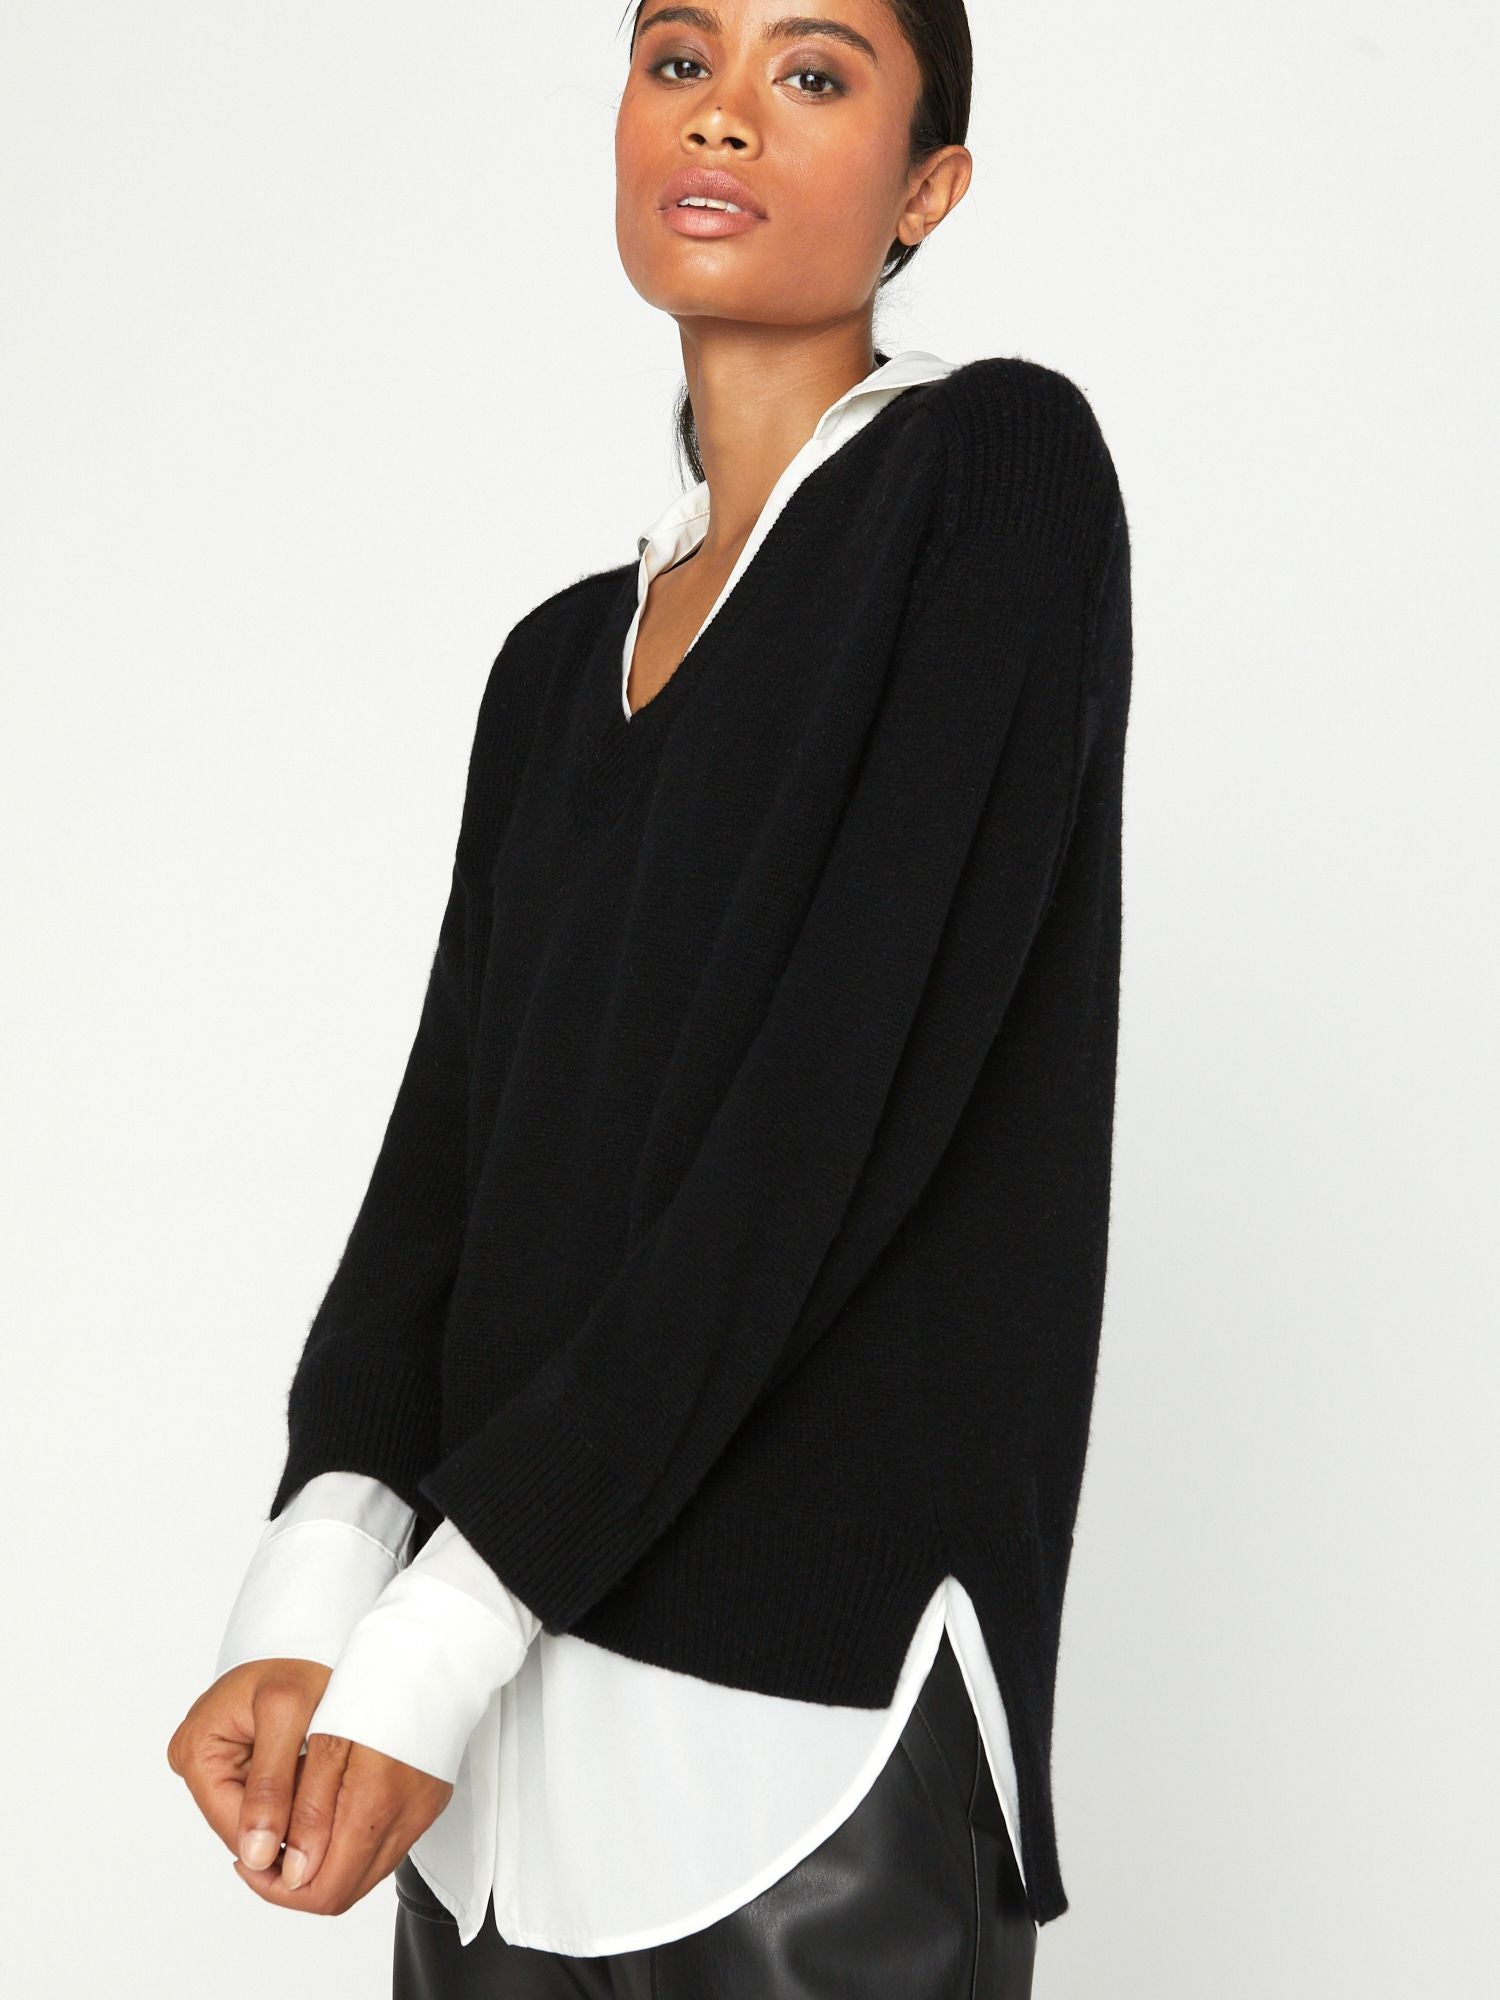 Looker black layered v-neck sweater side view